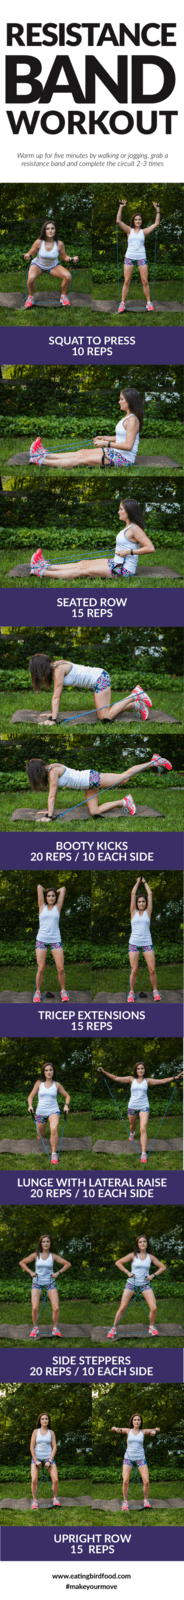 Take your workout anywhere with this full body resistance band workout